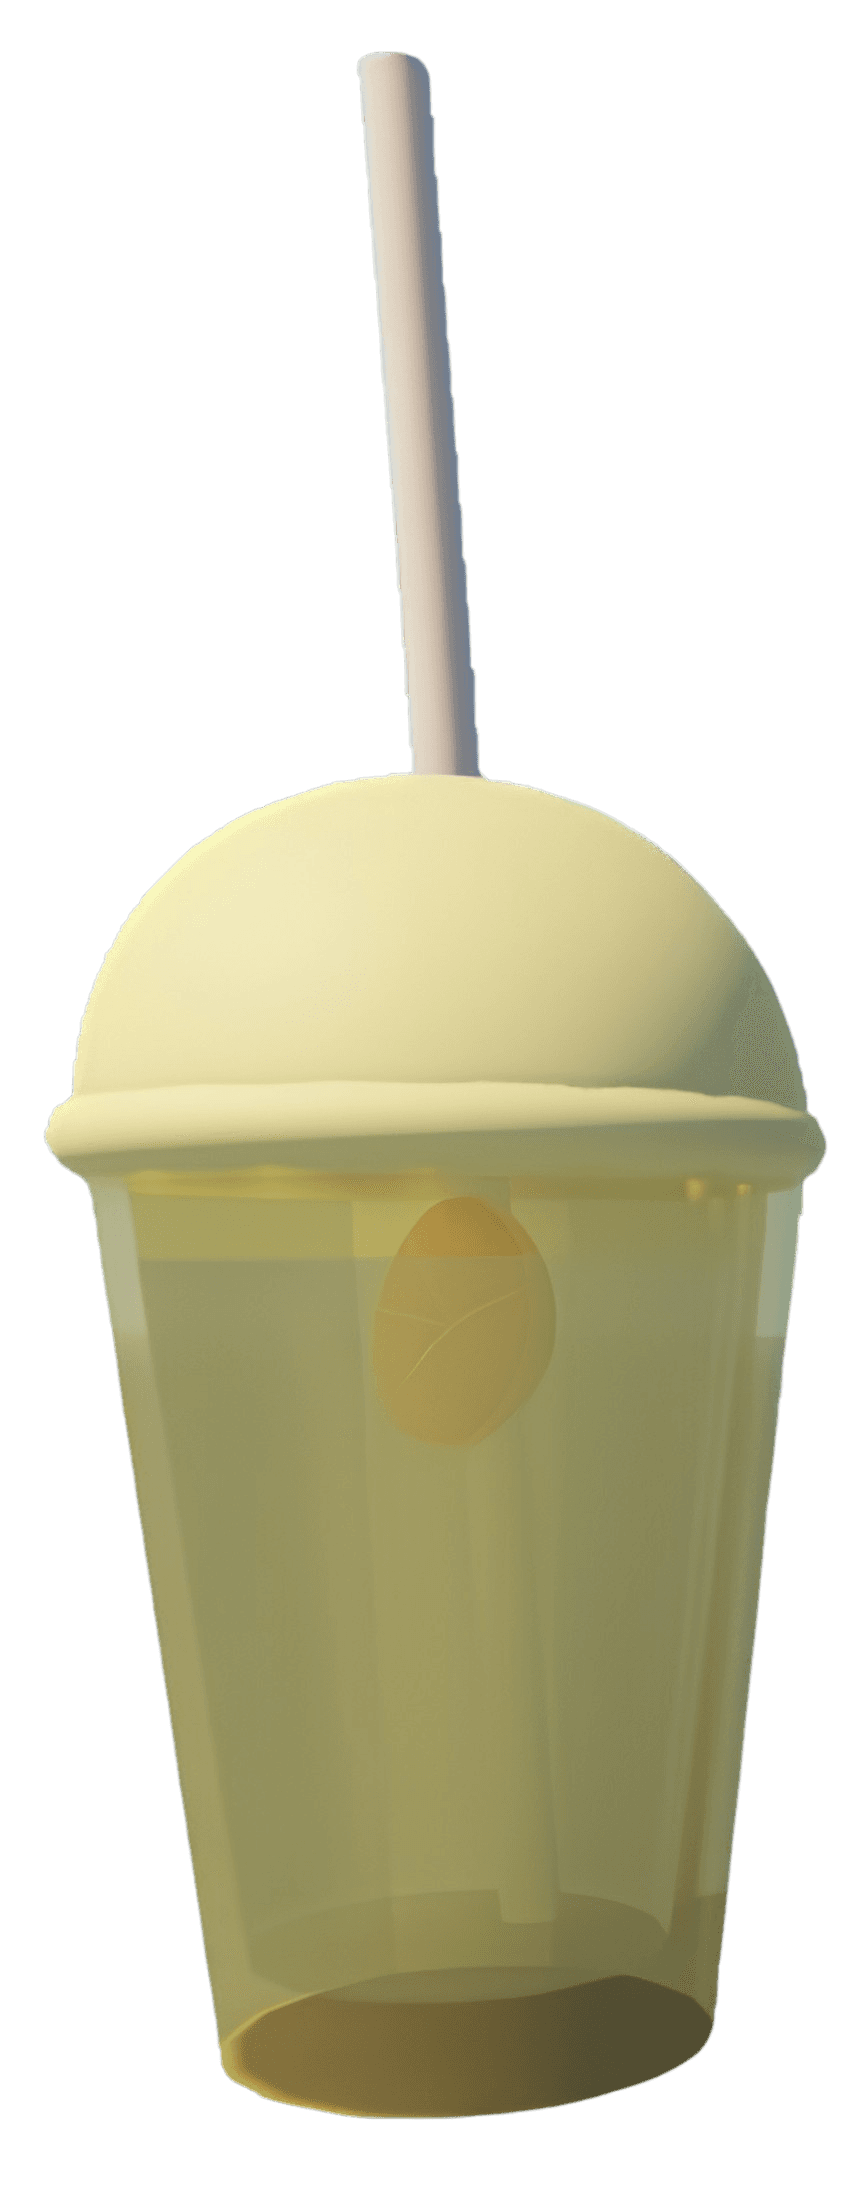 A cup of lemonade with a straw and lid.